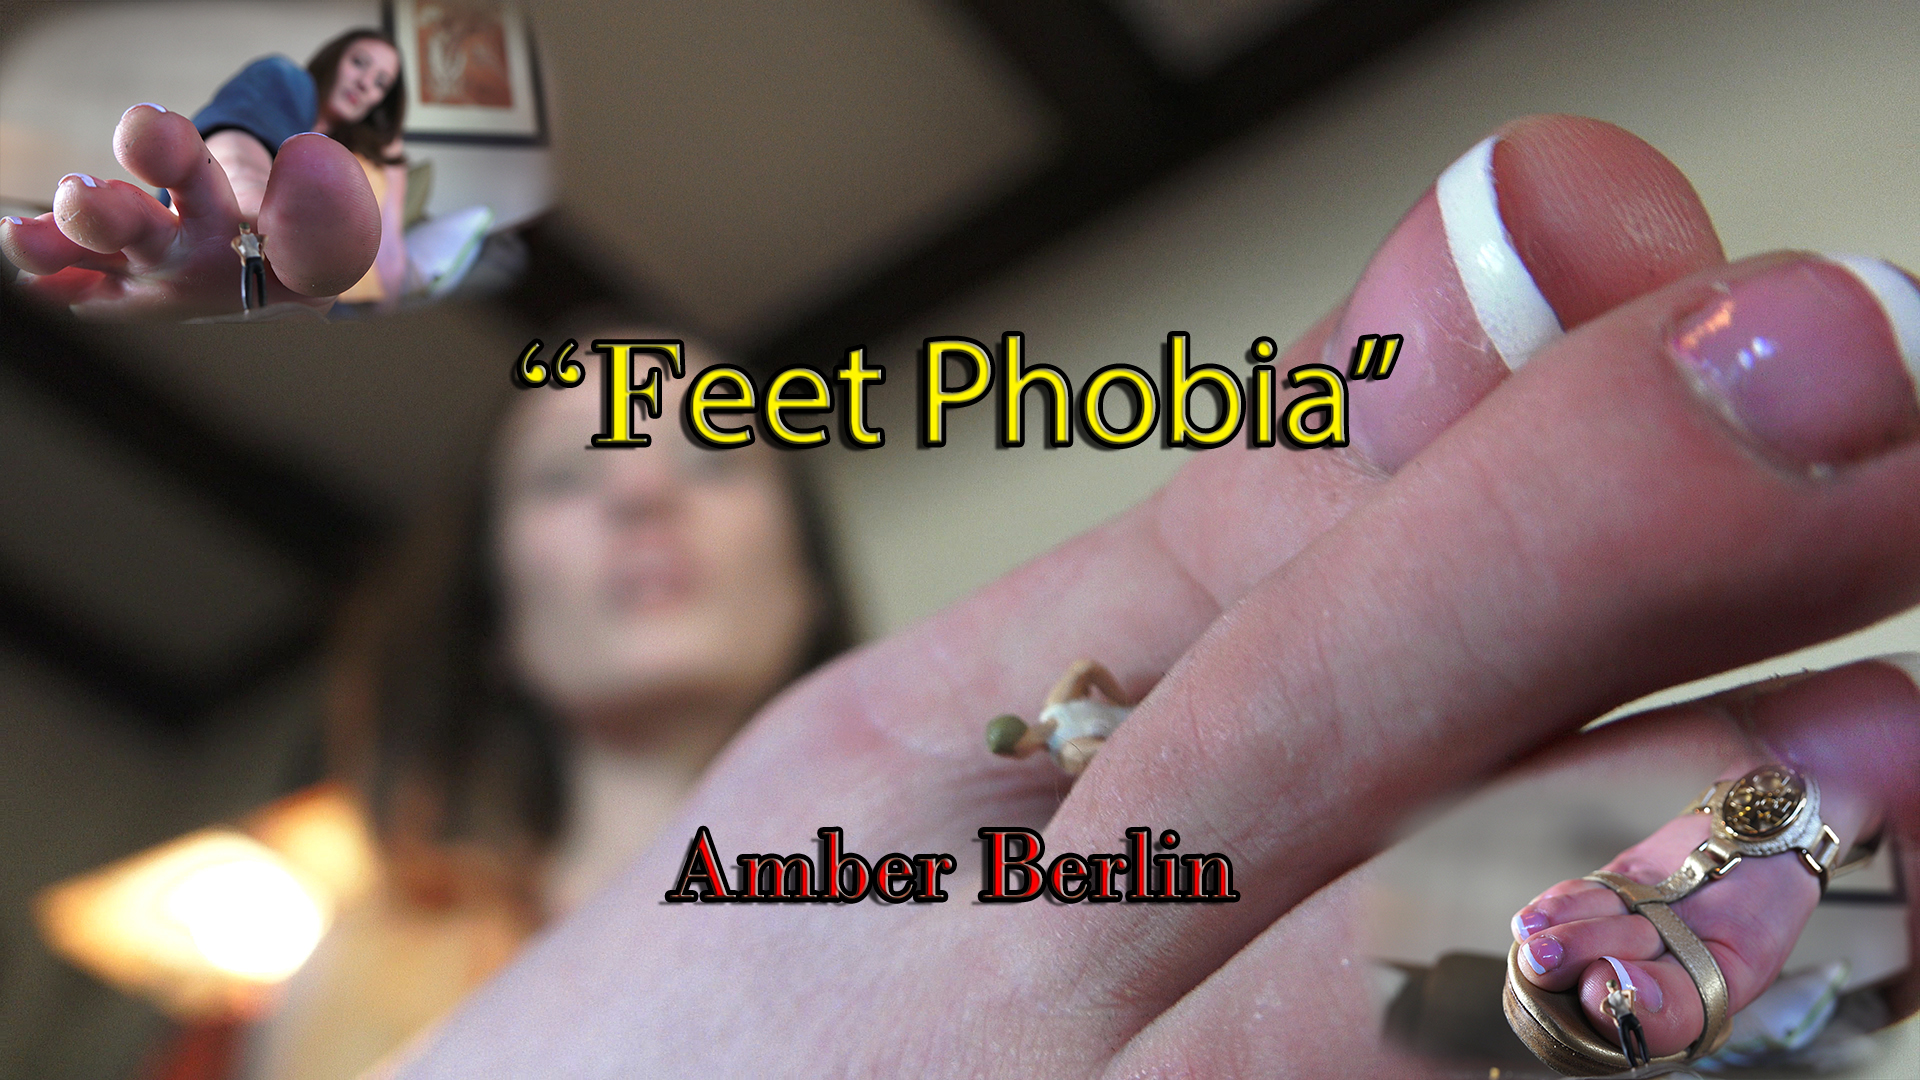 Gorgeous Amber Berlin cooked a very nice surprise for her stupid ex-boyfriend. he never admitted to like her feet, and always refused to give her foot rubs, claiming that "feet are disgusting". now, waking up at the size of a bug, with Amber's perfect french-pedicured toes wiggling closer and closer to his puny body, he might be too overwhelmed to hide the truth about his "feet phobia"... this video was filmed in 4k, and Amber is simply amazing! some of the best toes on GSF so far!
